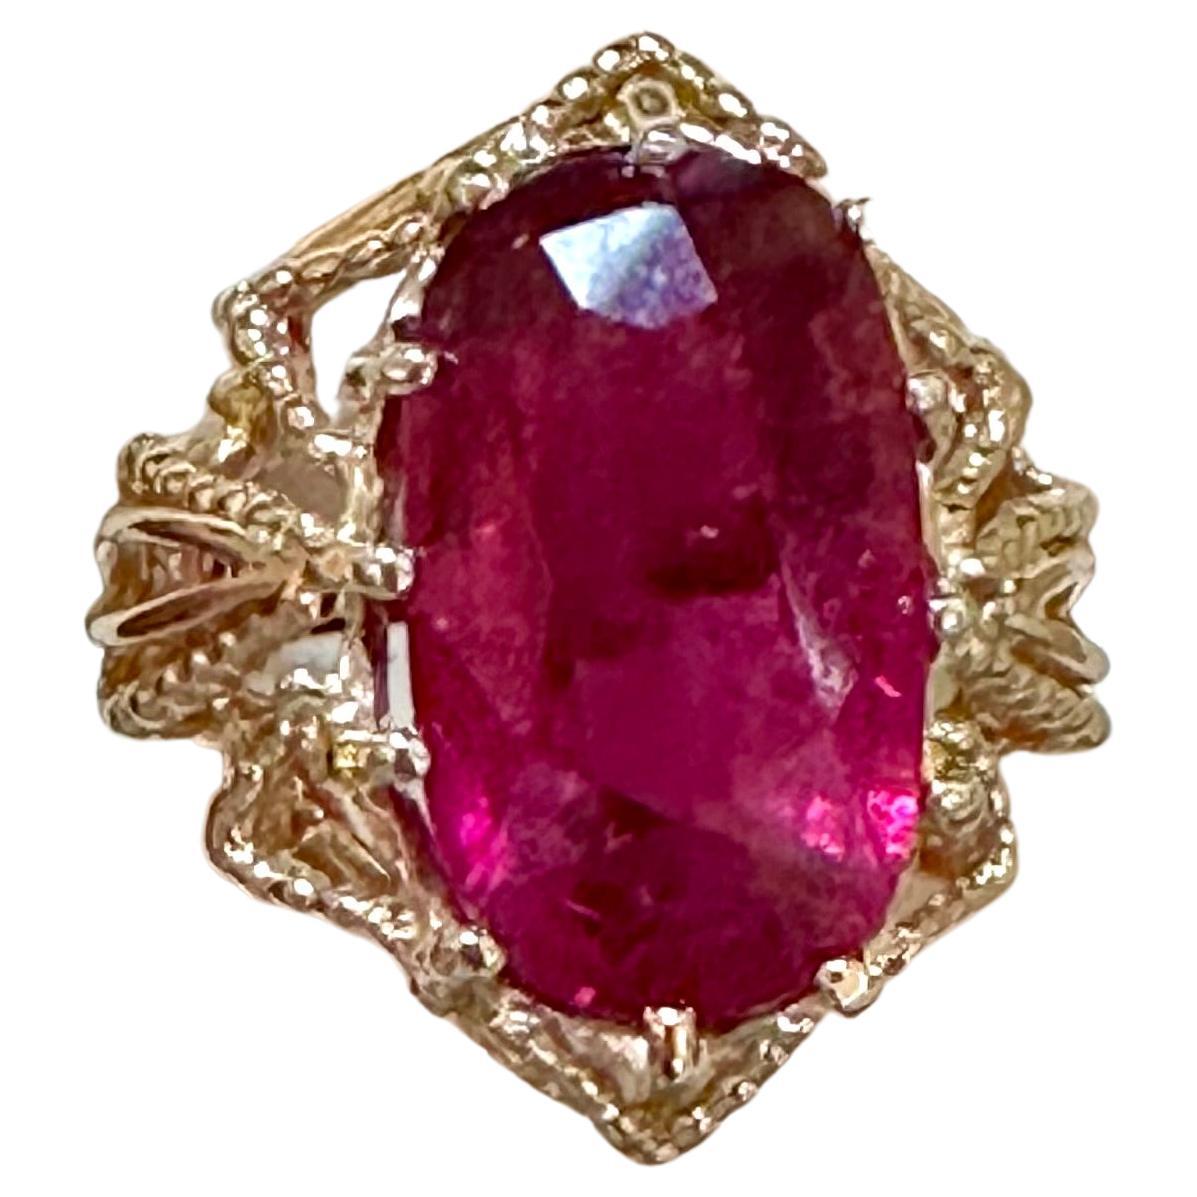 Approximately 10 Carat Oval Cut Natural Pink Tourmaline 14 Karat Yellow Gold Ring
10 Carat of Pink Tourmaline , Oval shape 
Gold: 14 Karat Yellow  gold , Beautiful design
Weight: 6.5 gram Including stone

Ring Size 6 ( can be altered)
 Very good